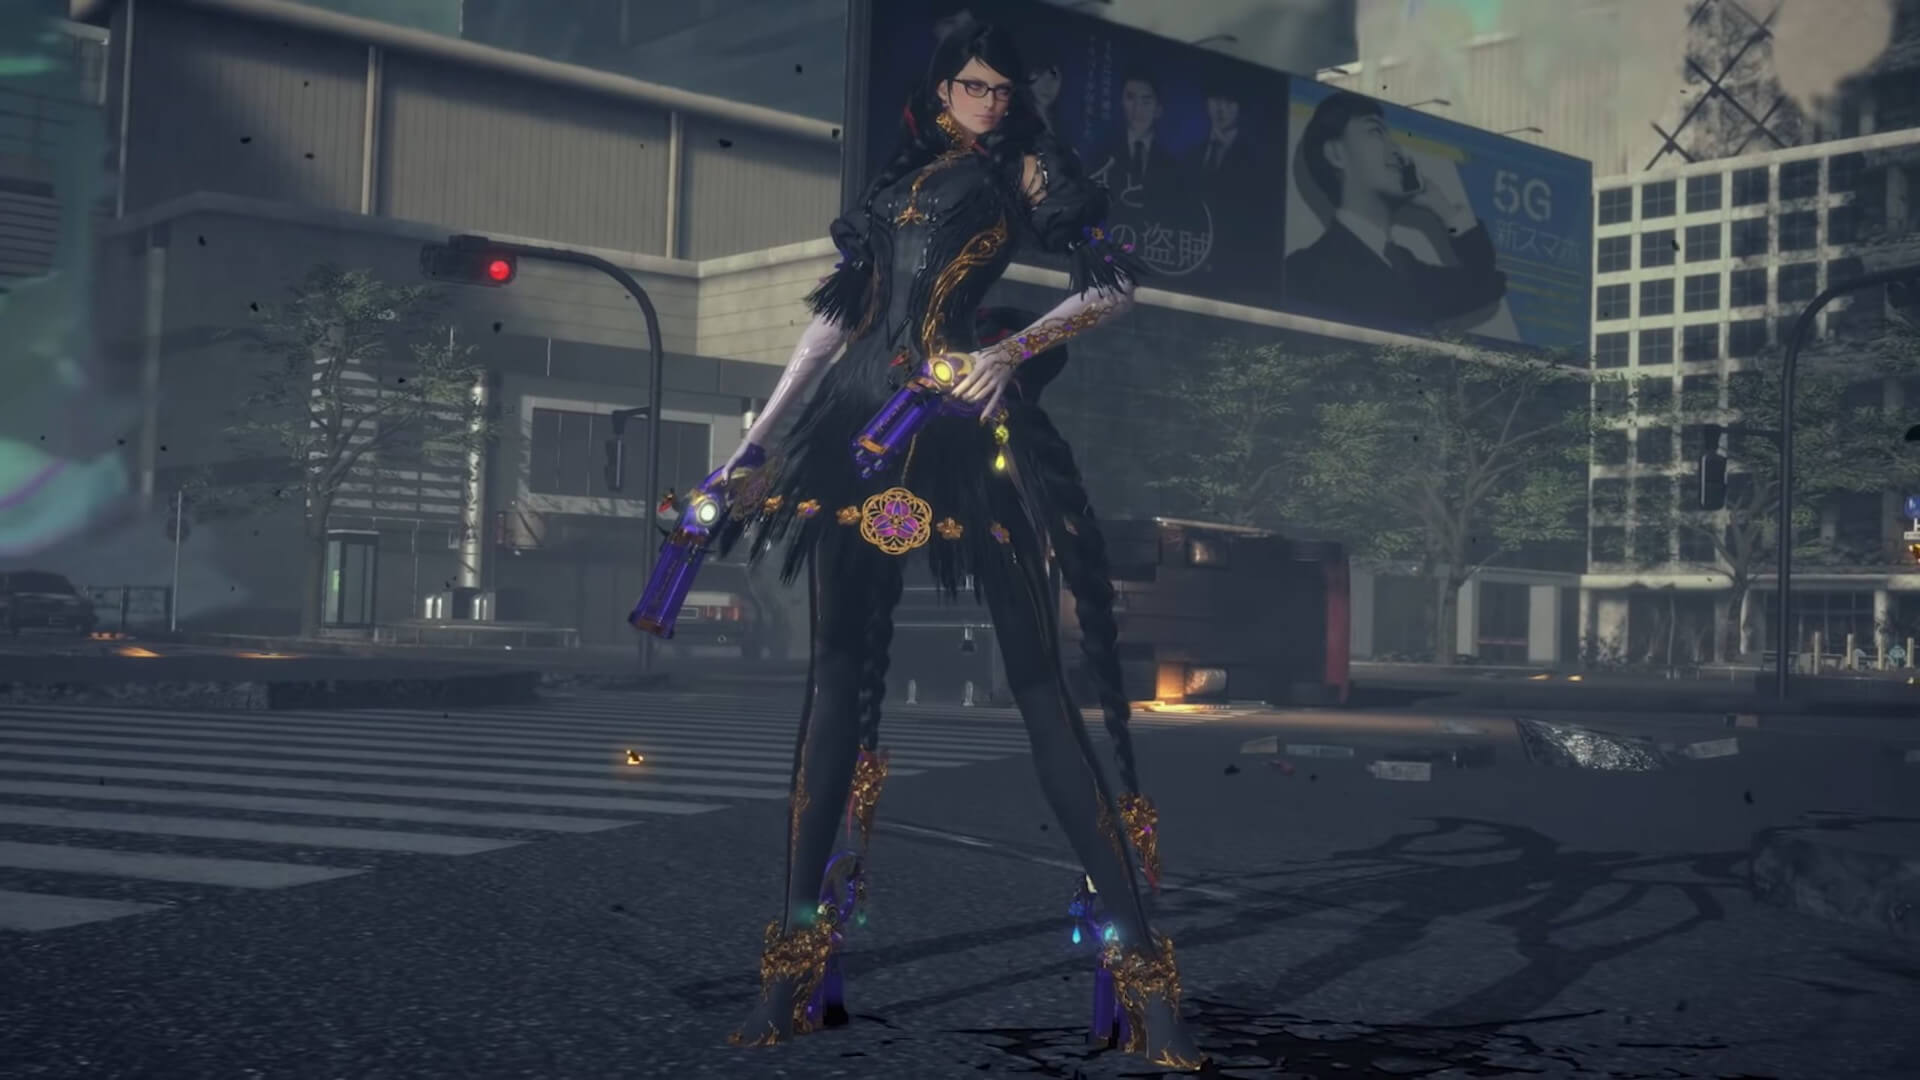 Bayonetta posing in the upcoming Bayonetta 3, which we could get a glimpse at in tomorrow's NIntendo Direct